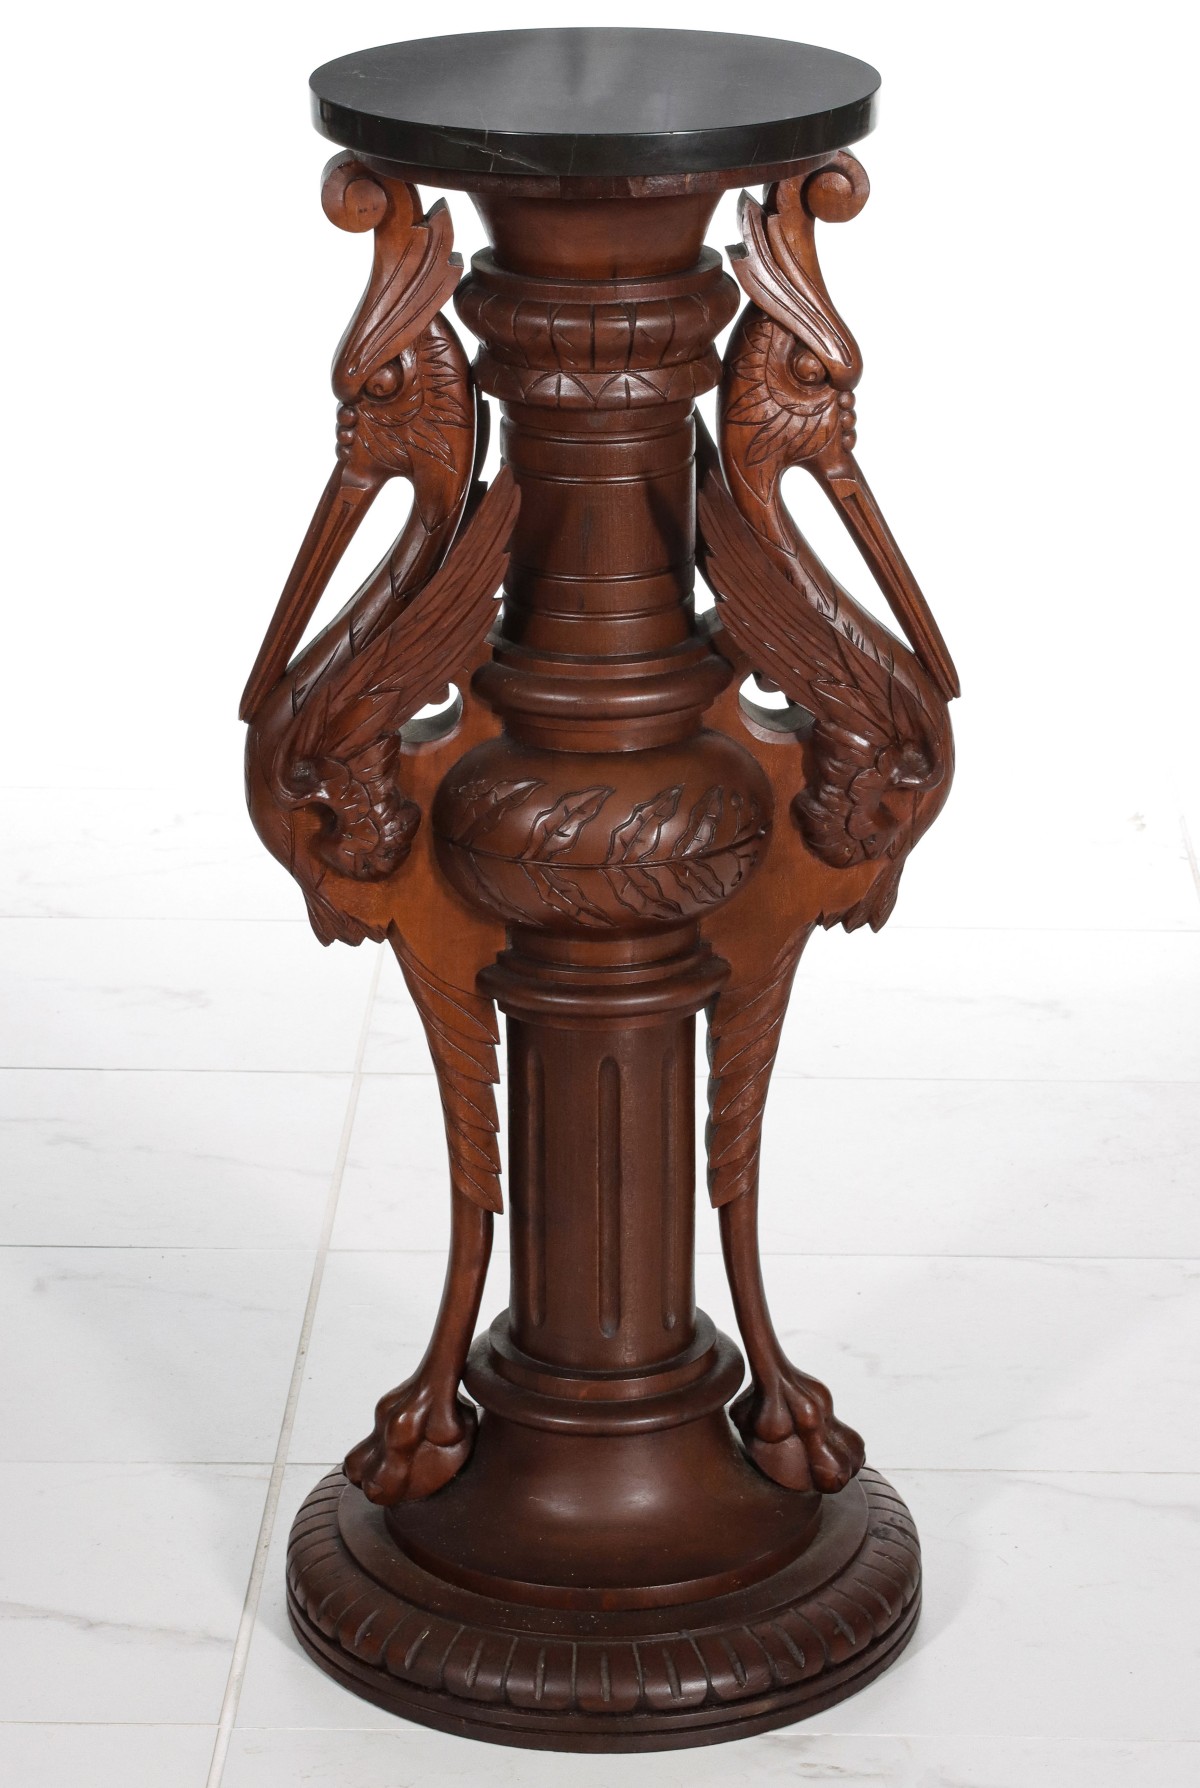 A GOOD CARVED WALNUT PEDESTAL WITH WINGED FIGURES